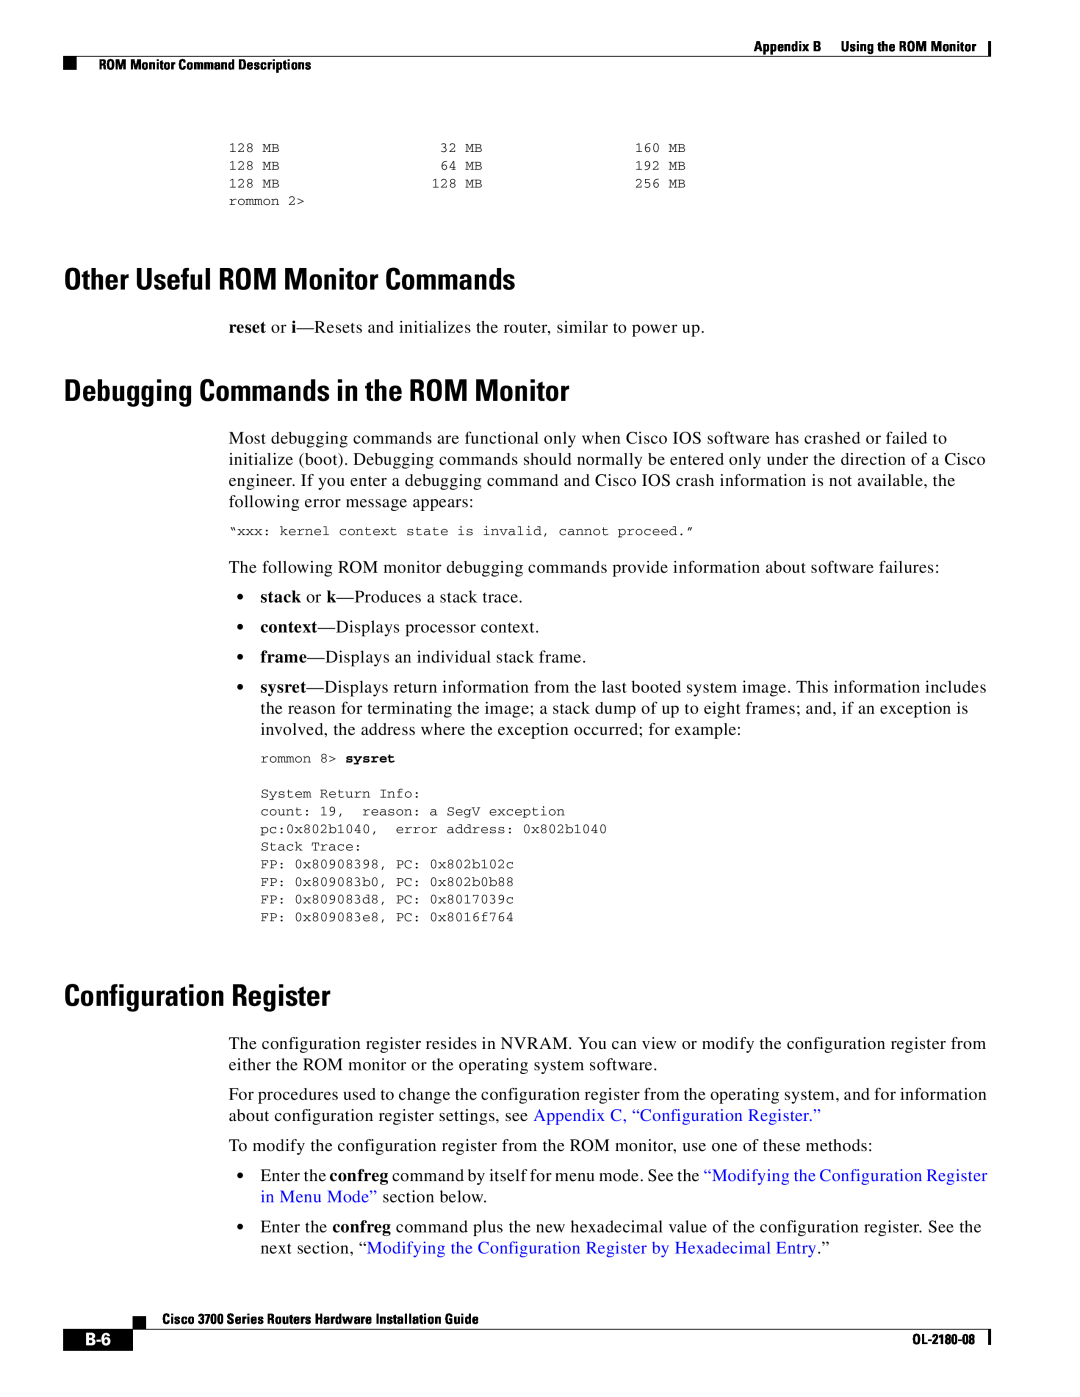 Cisco Systems 3700 Series Other Useful ROM Monitor Commands, Debugging Commands in the ROM Monitor, Configuration Register 